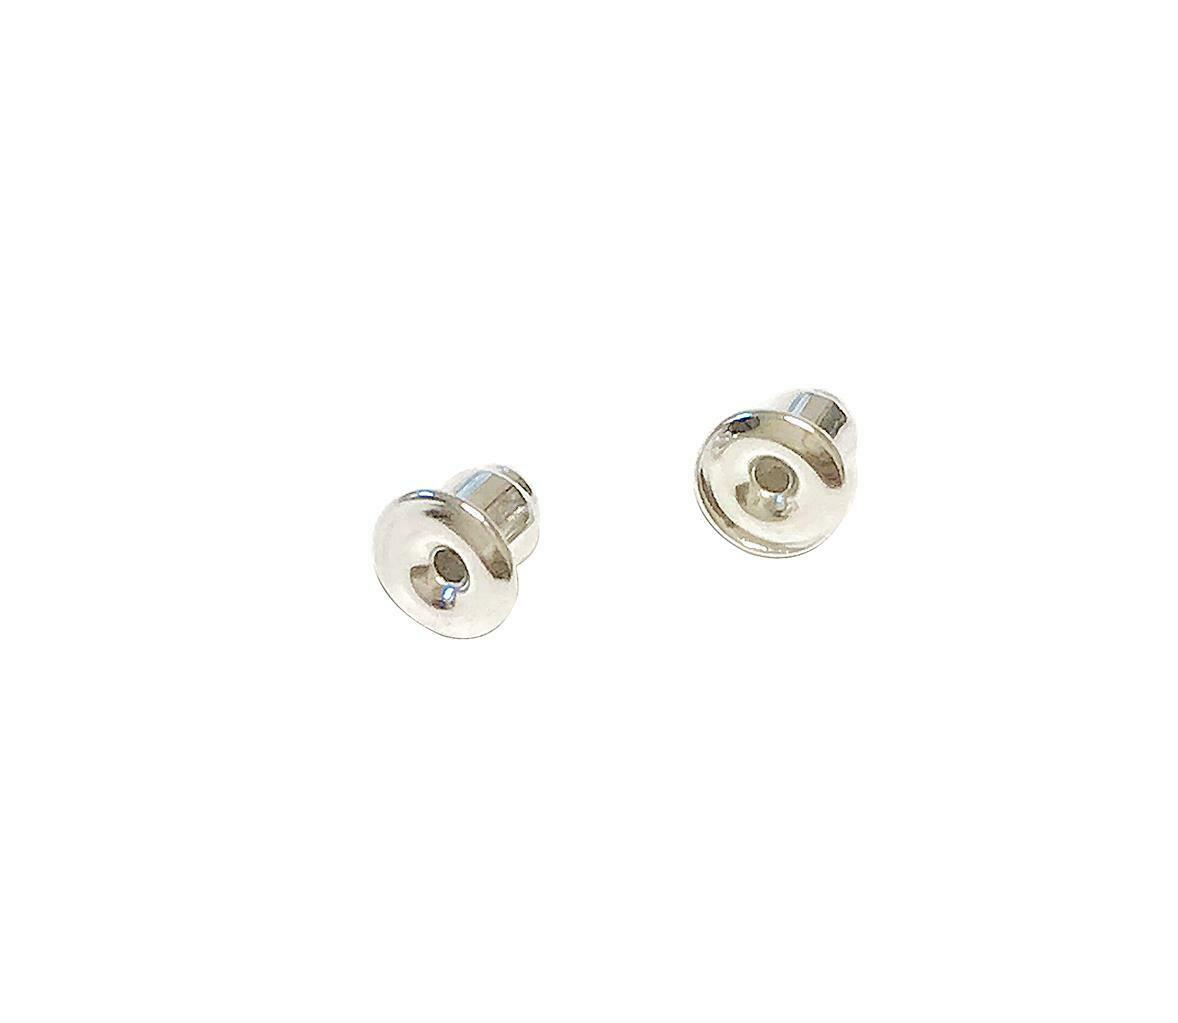 Aluminium And Silicon Rubber 5.10mm Earring Stud Back 1 Pair